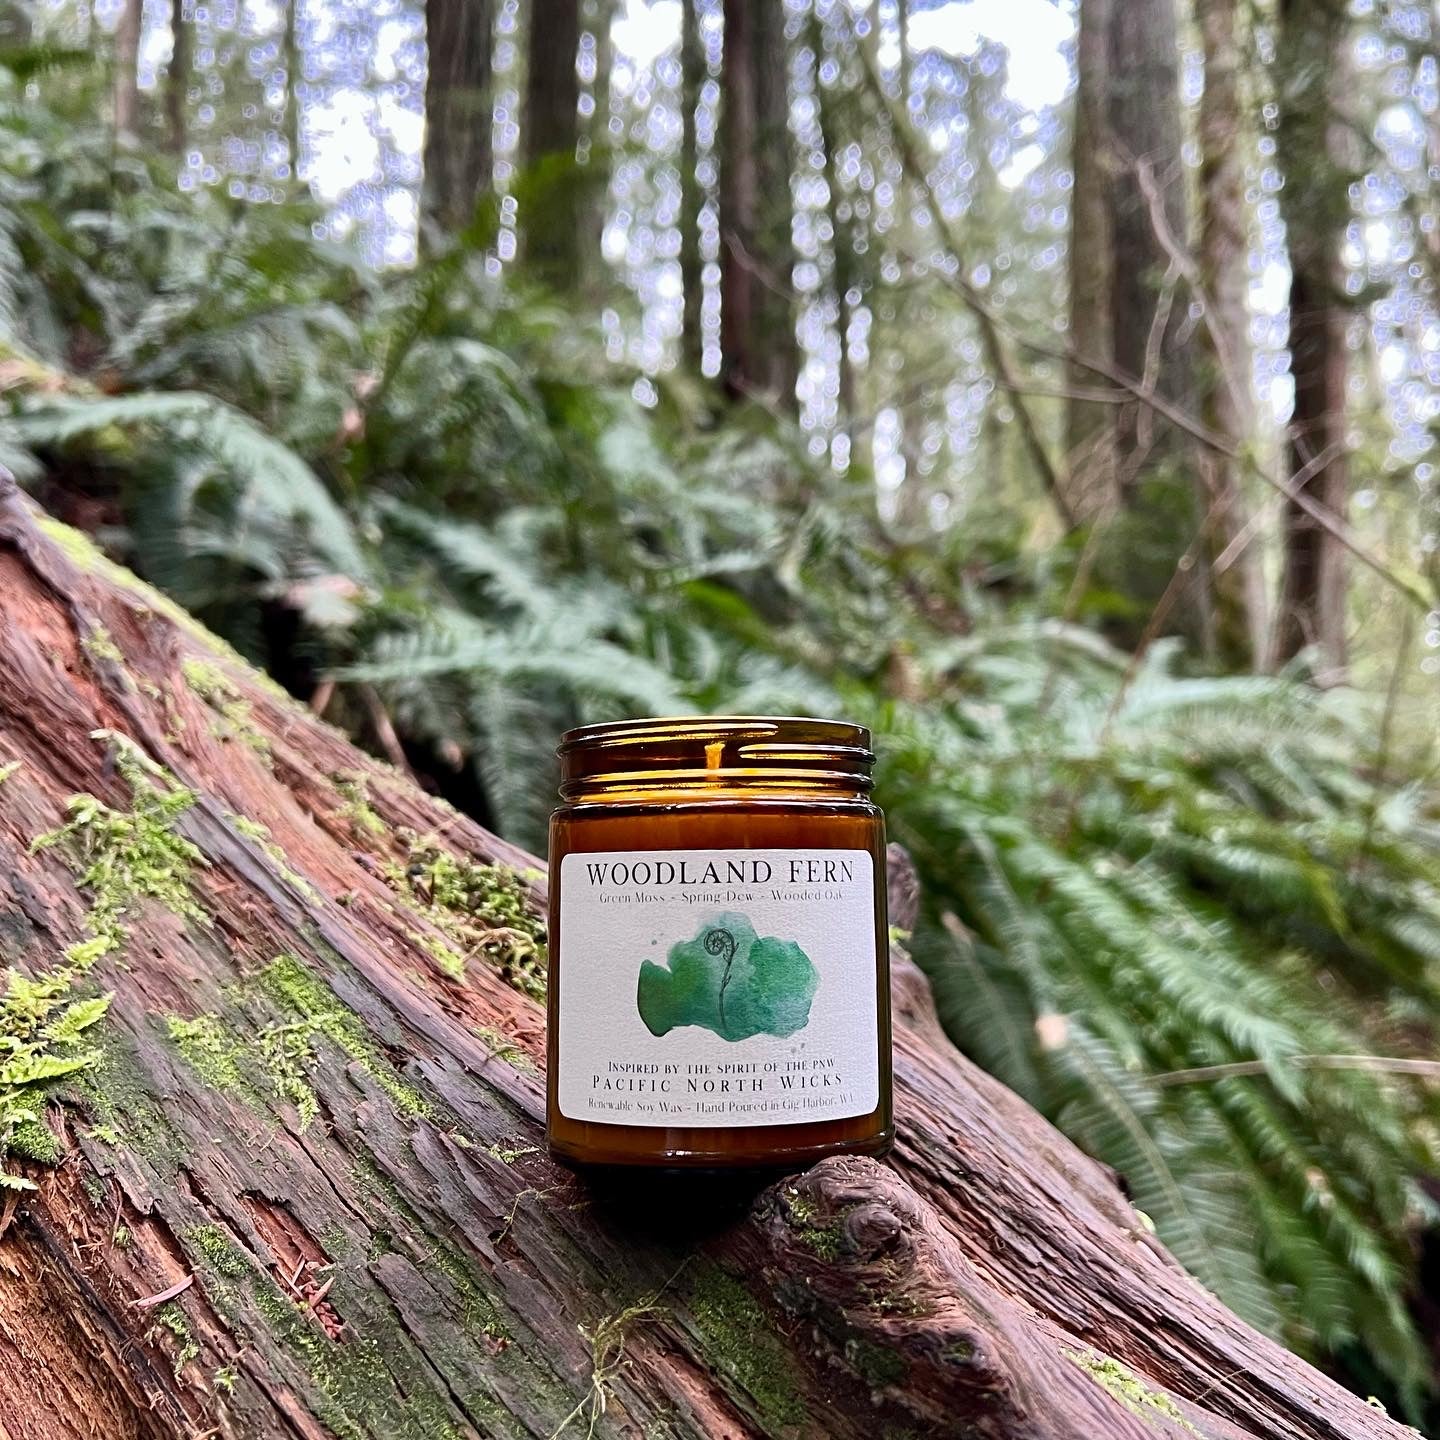 PNW Hike in Old Growth Forest with Green Woodland Fern Candle